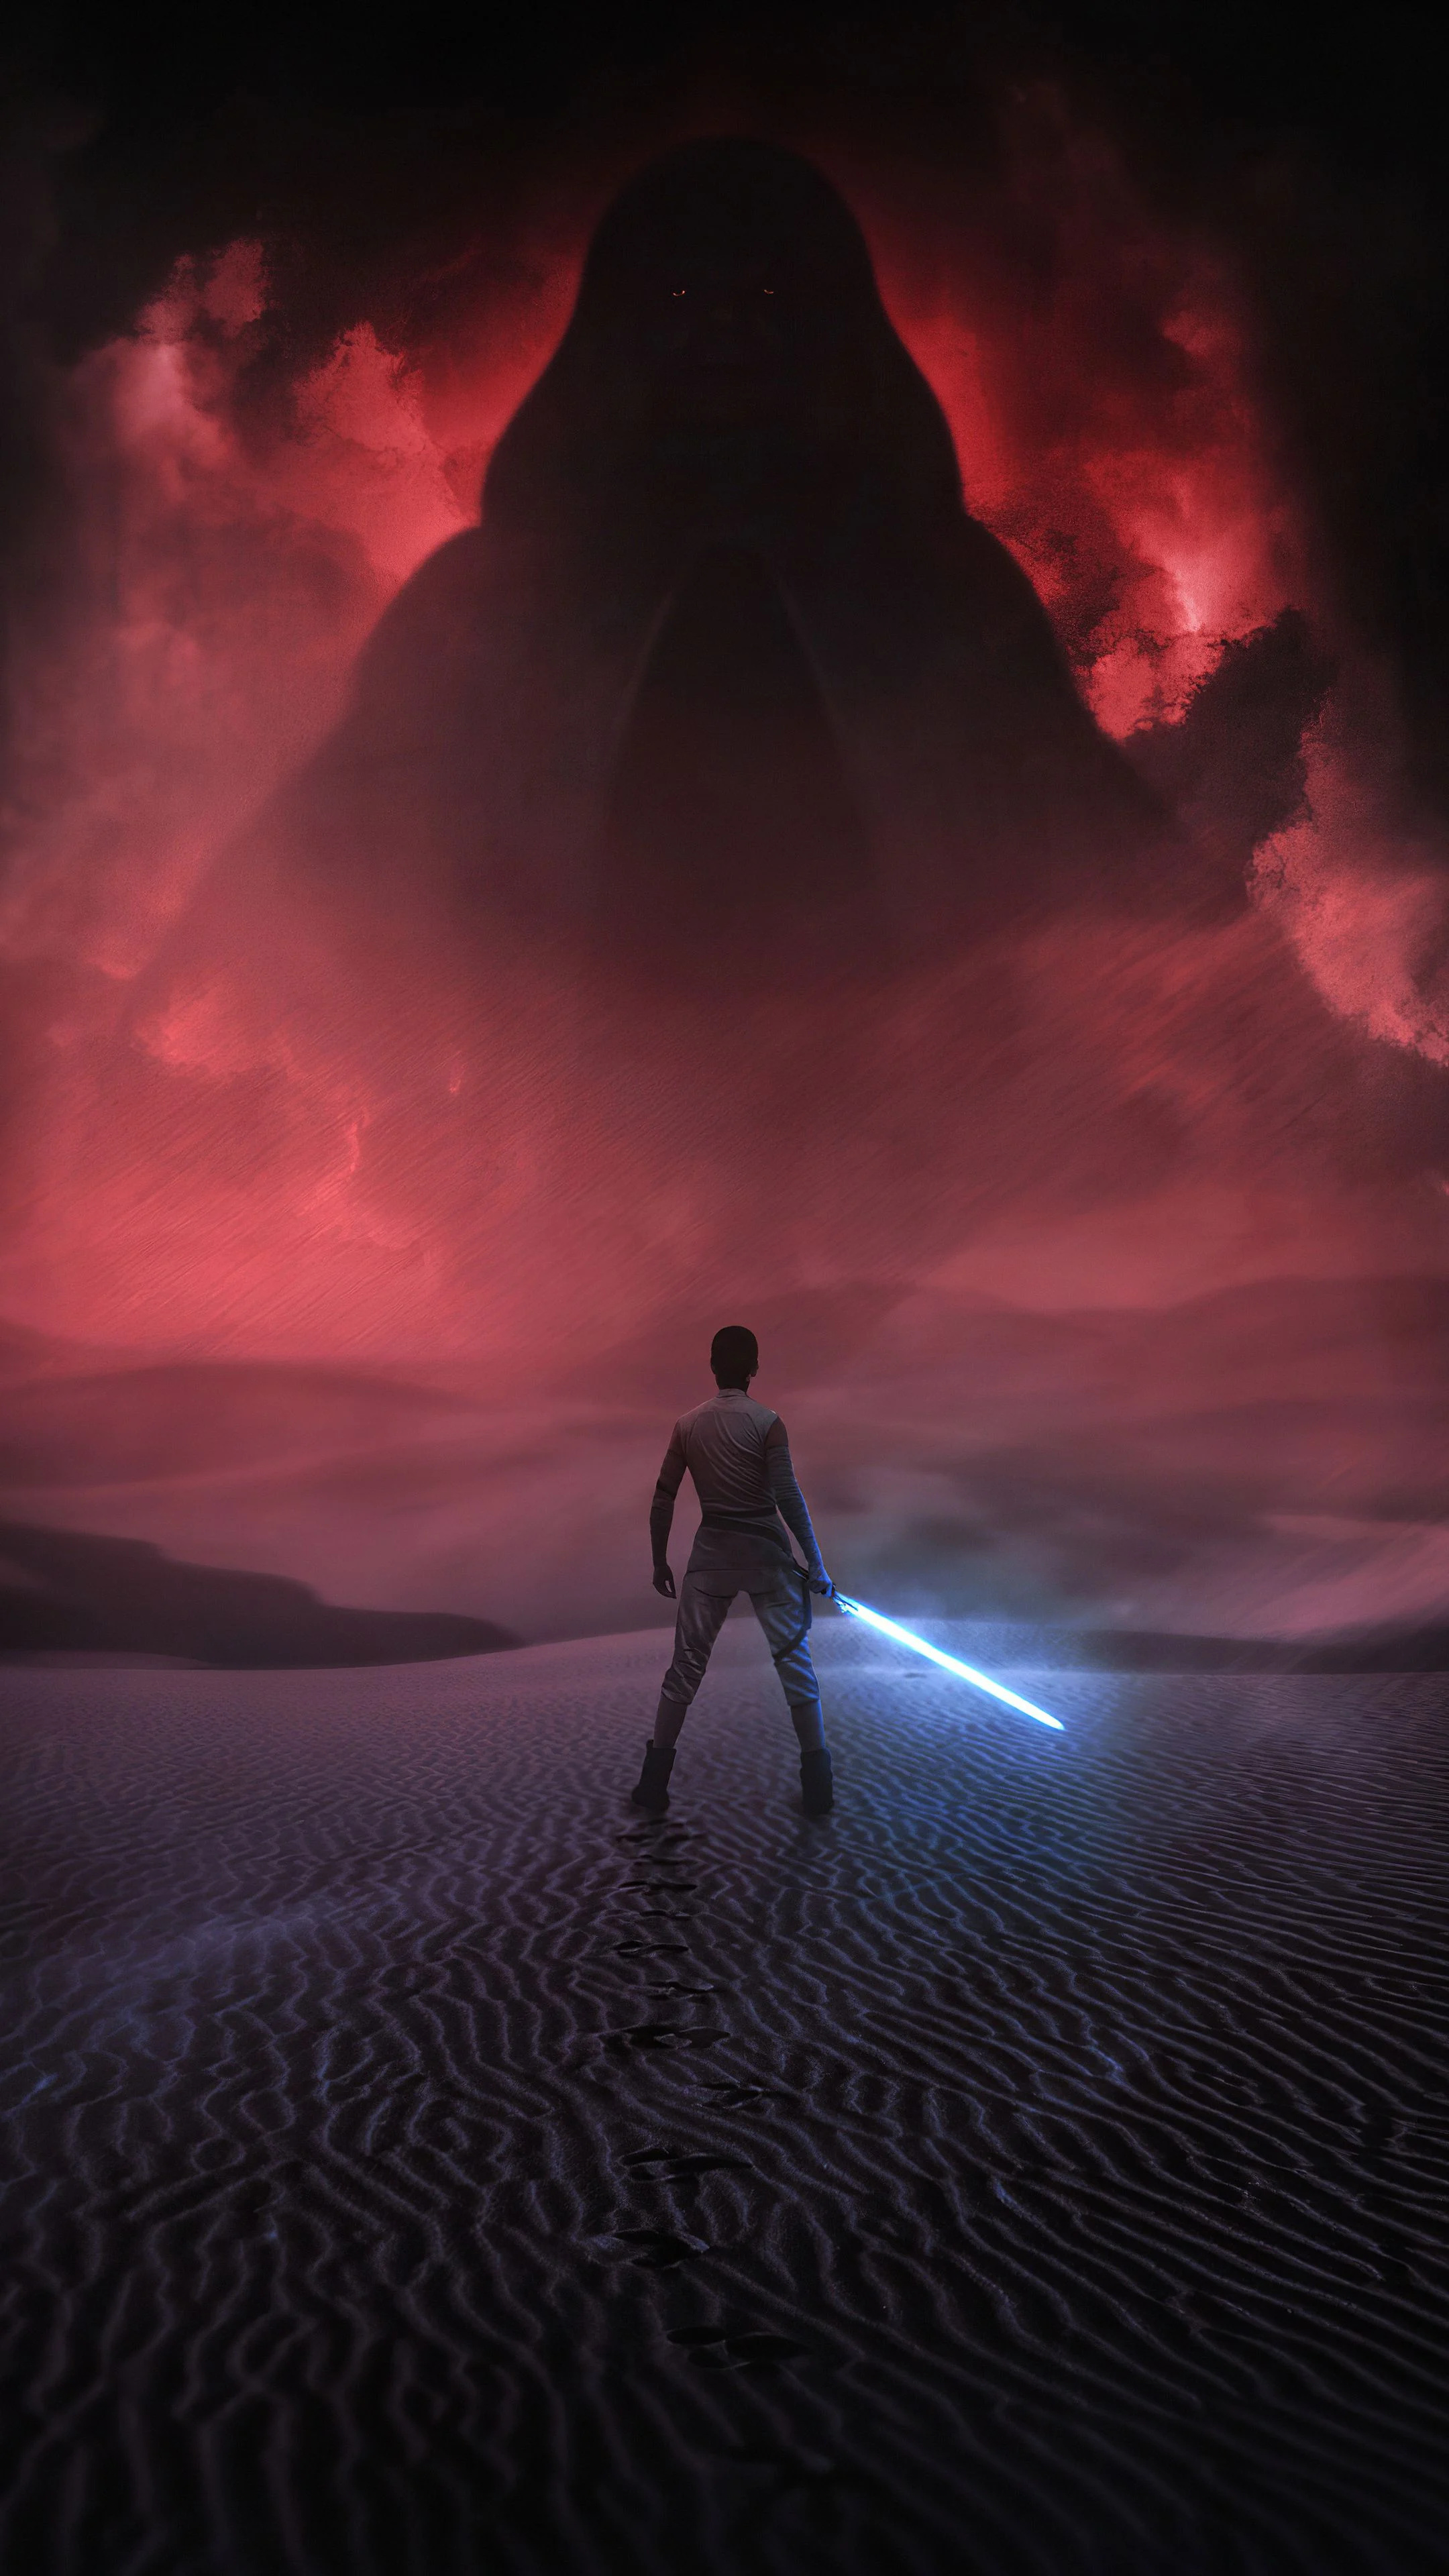 Star Wars: The Rise Of Skywalker: The film follows The Force Awakens (2015) and The Last Jedi (2017). 2160x3840 4K Wallpaper.